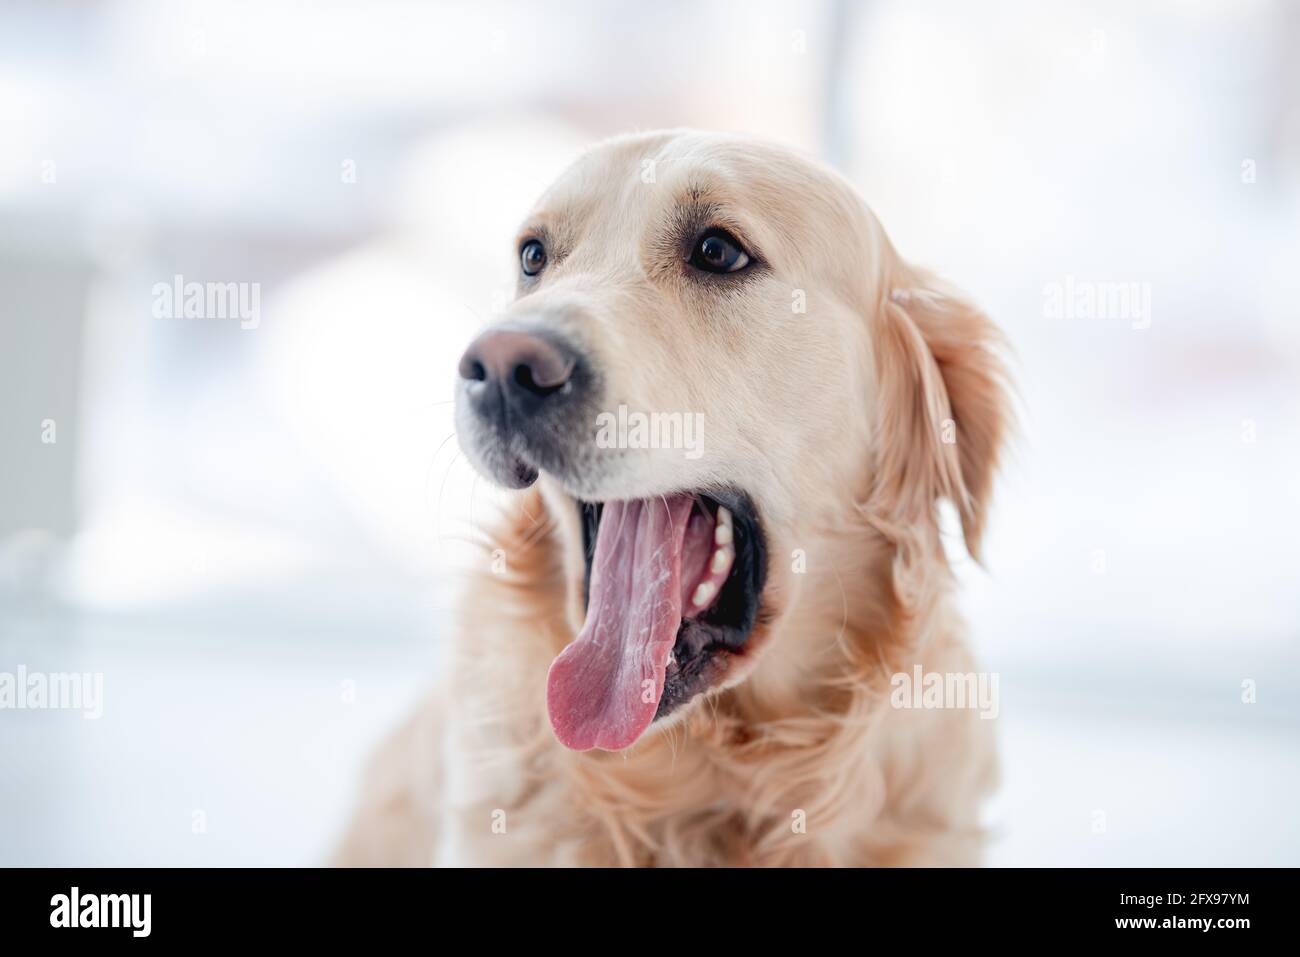 Golden retriever dog with open mouth Stock Photo